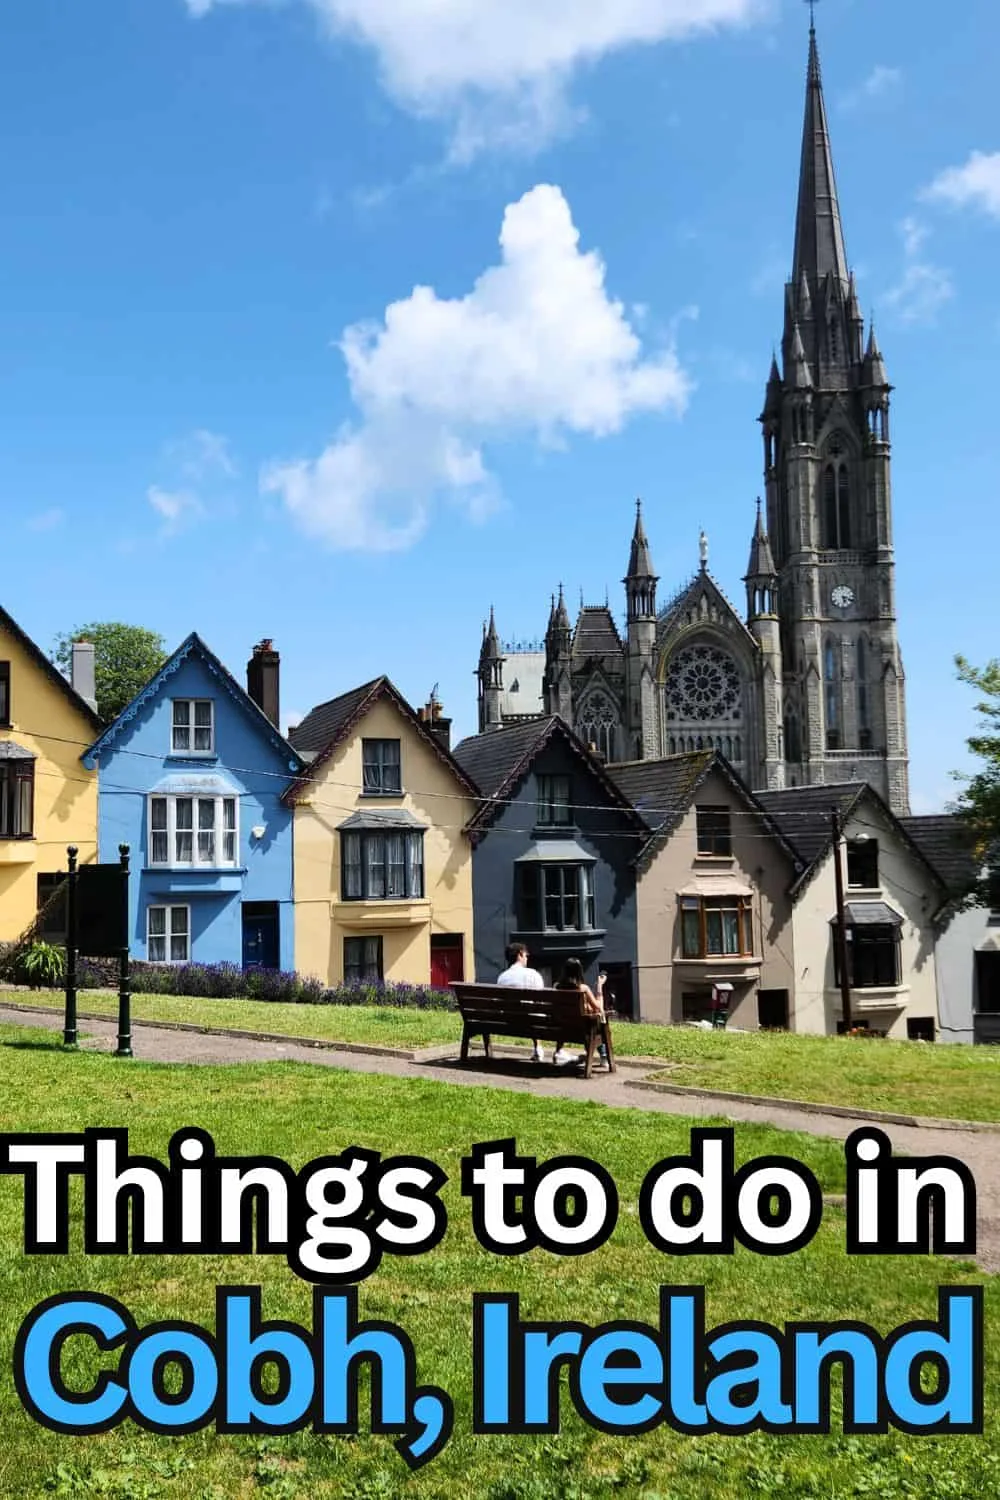 Things to do in Cobh Ireland